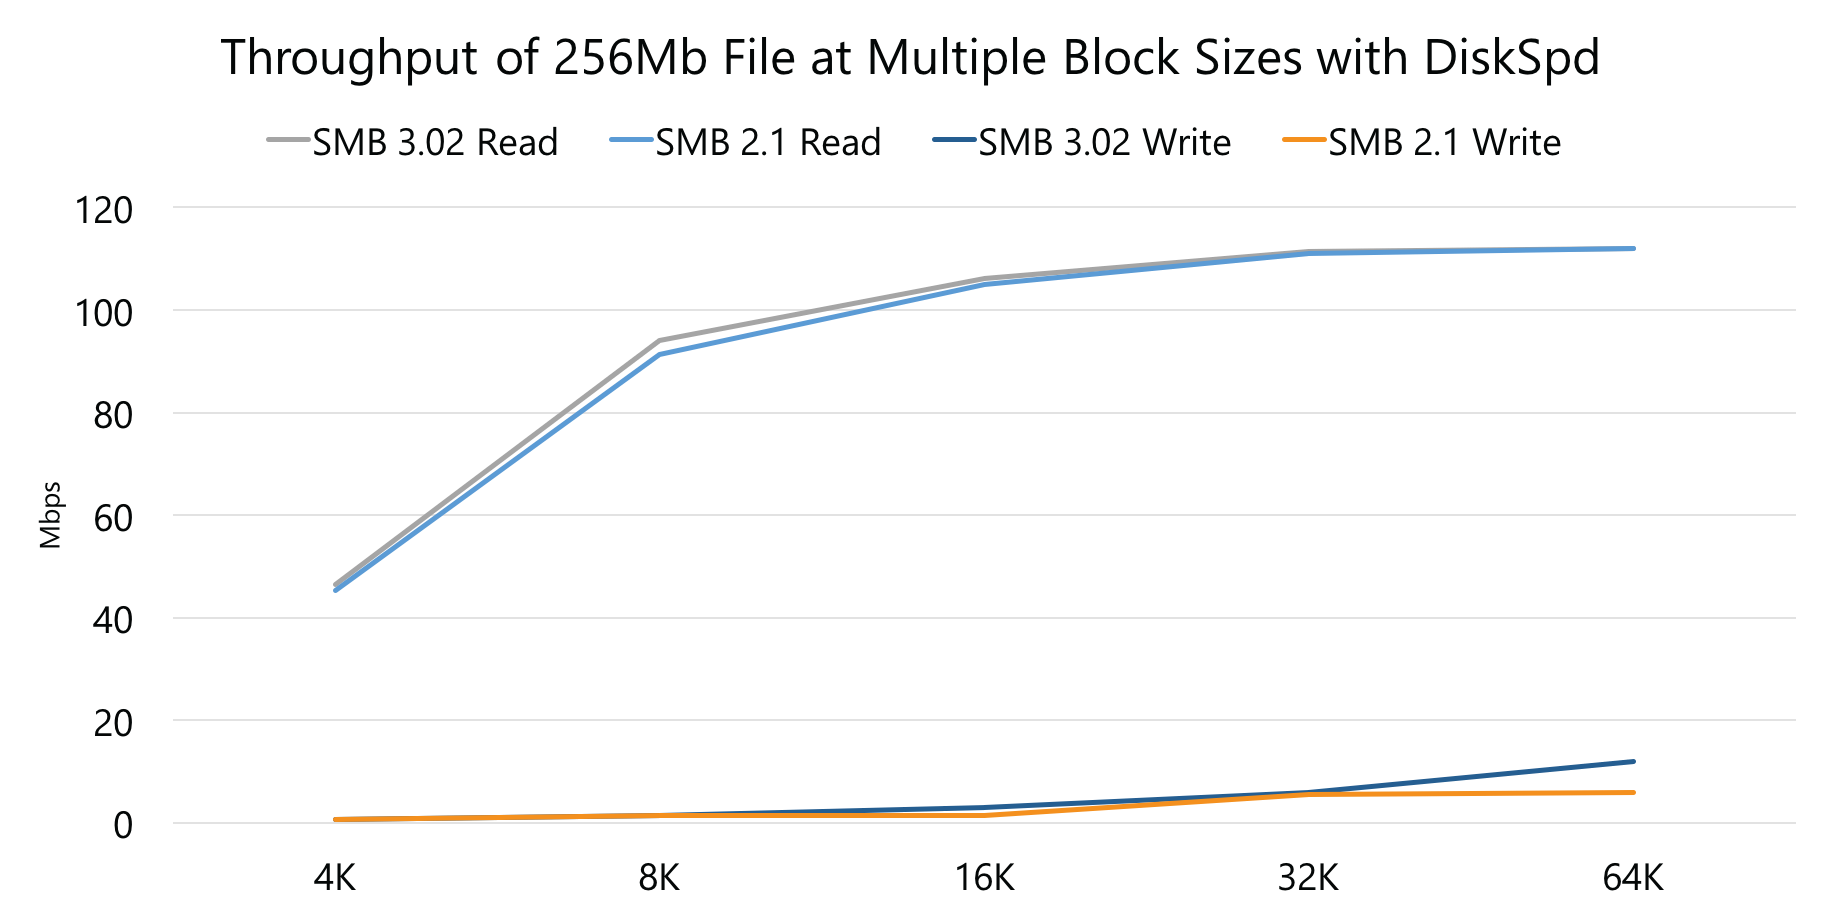 No Difference in Network Throughput between SMB 2.1 and SMB 3.02